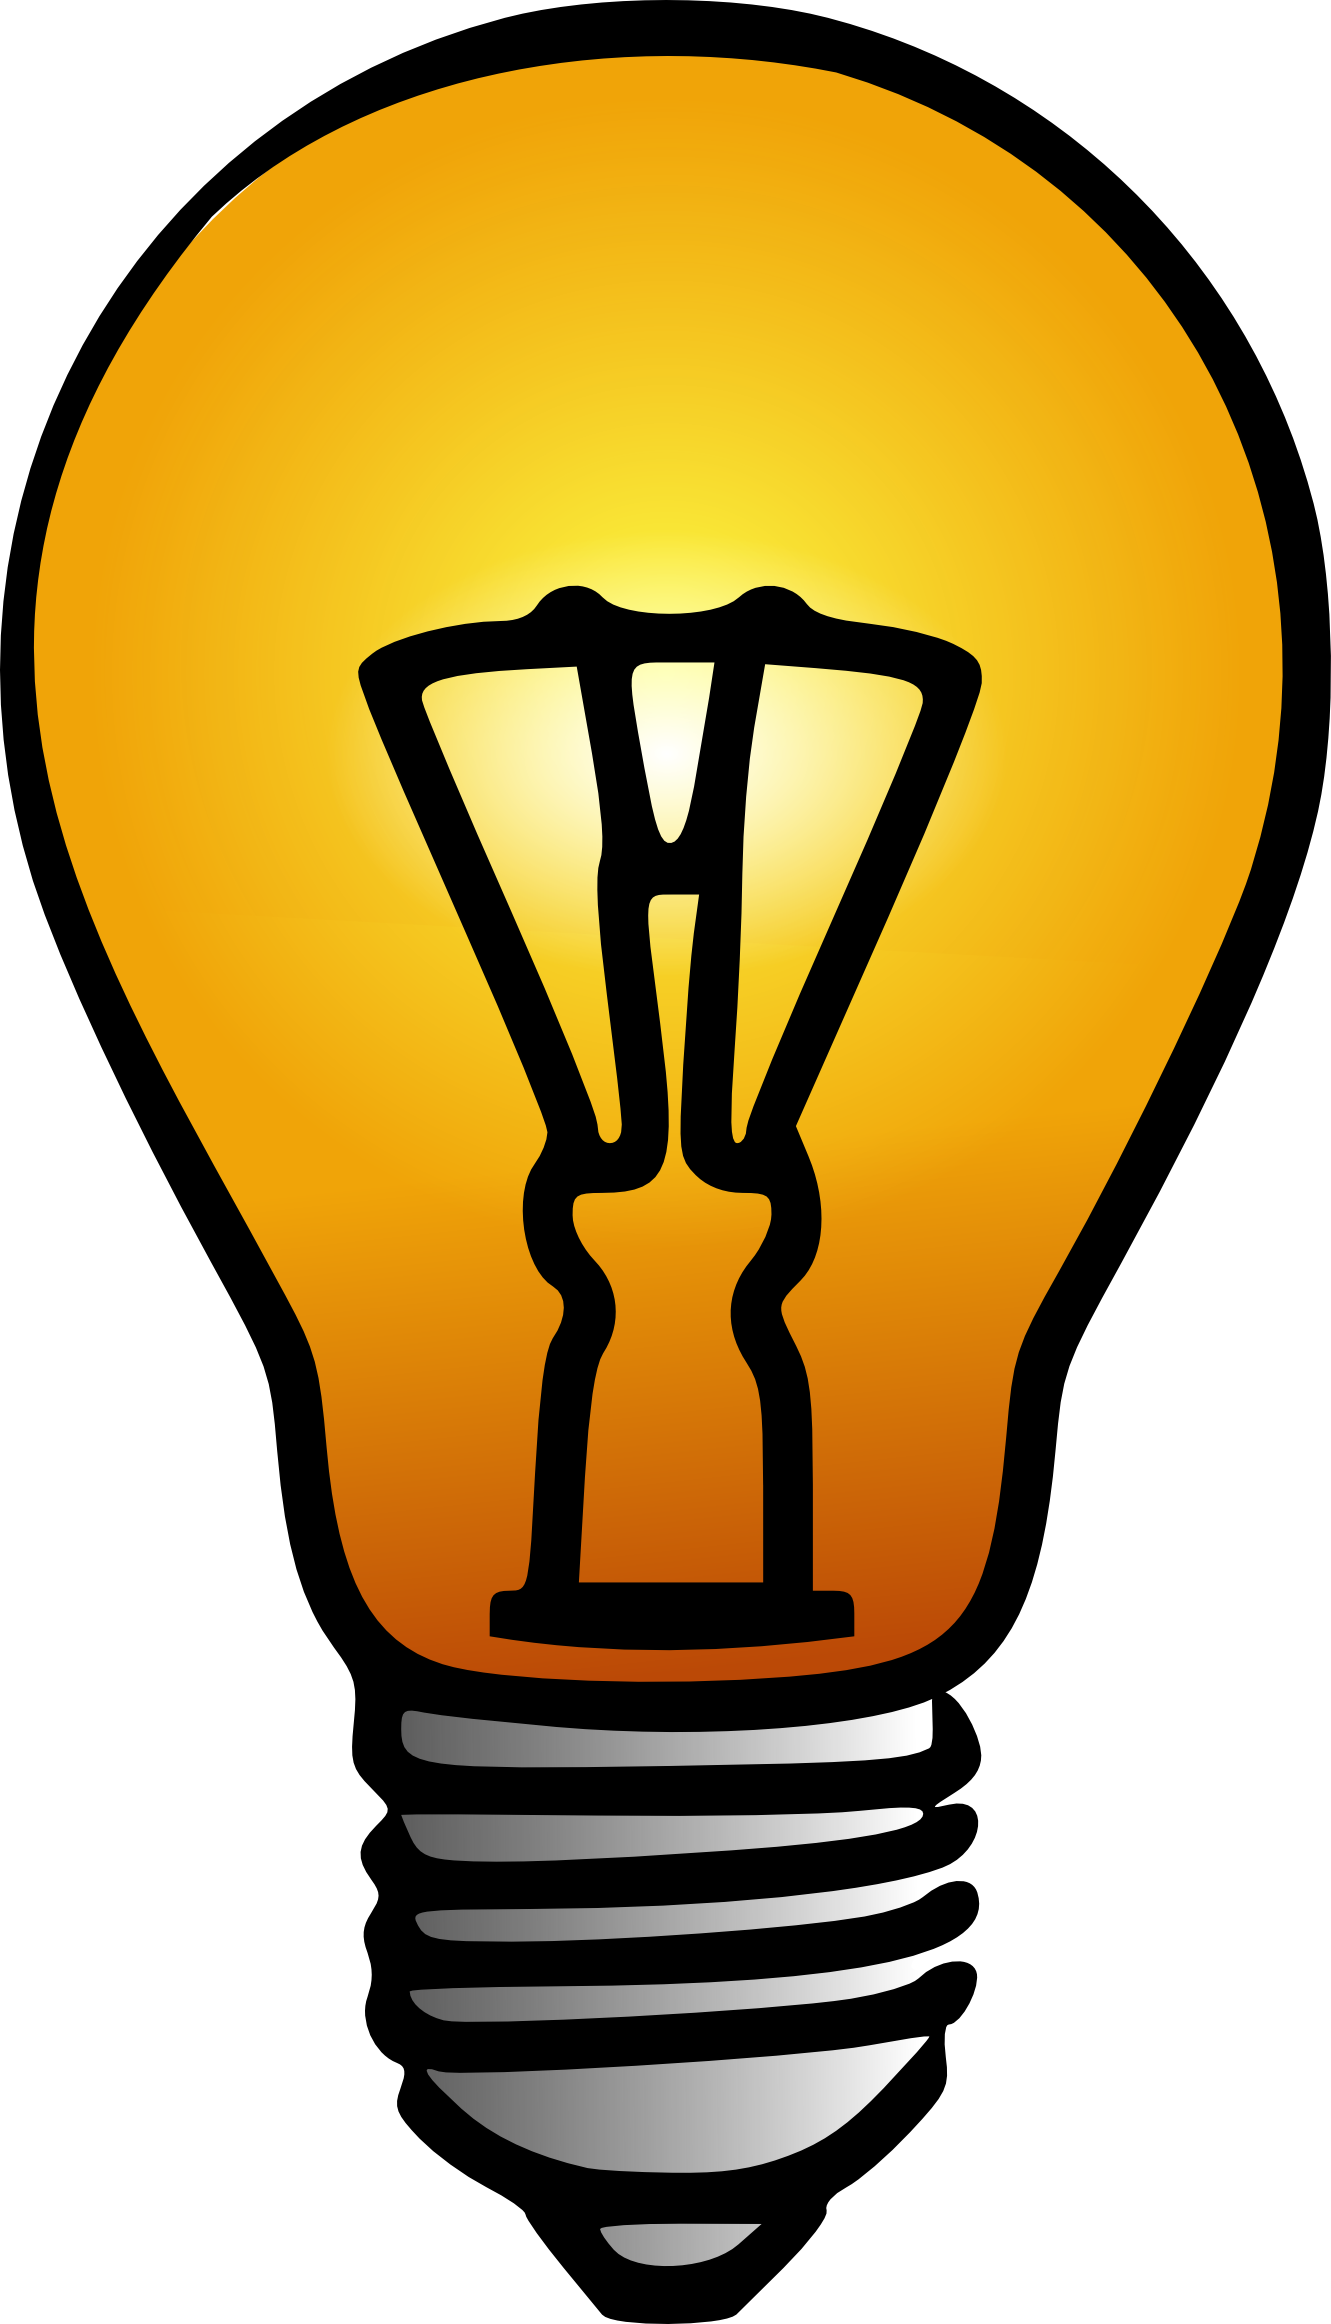 Clip Art: Light Bulb Bulb RSS openclipart.org  - Clipart library 